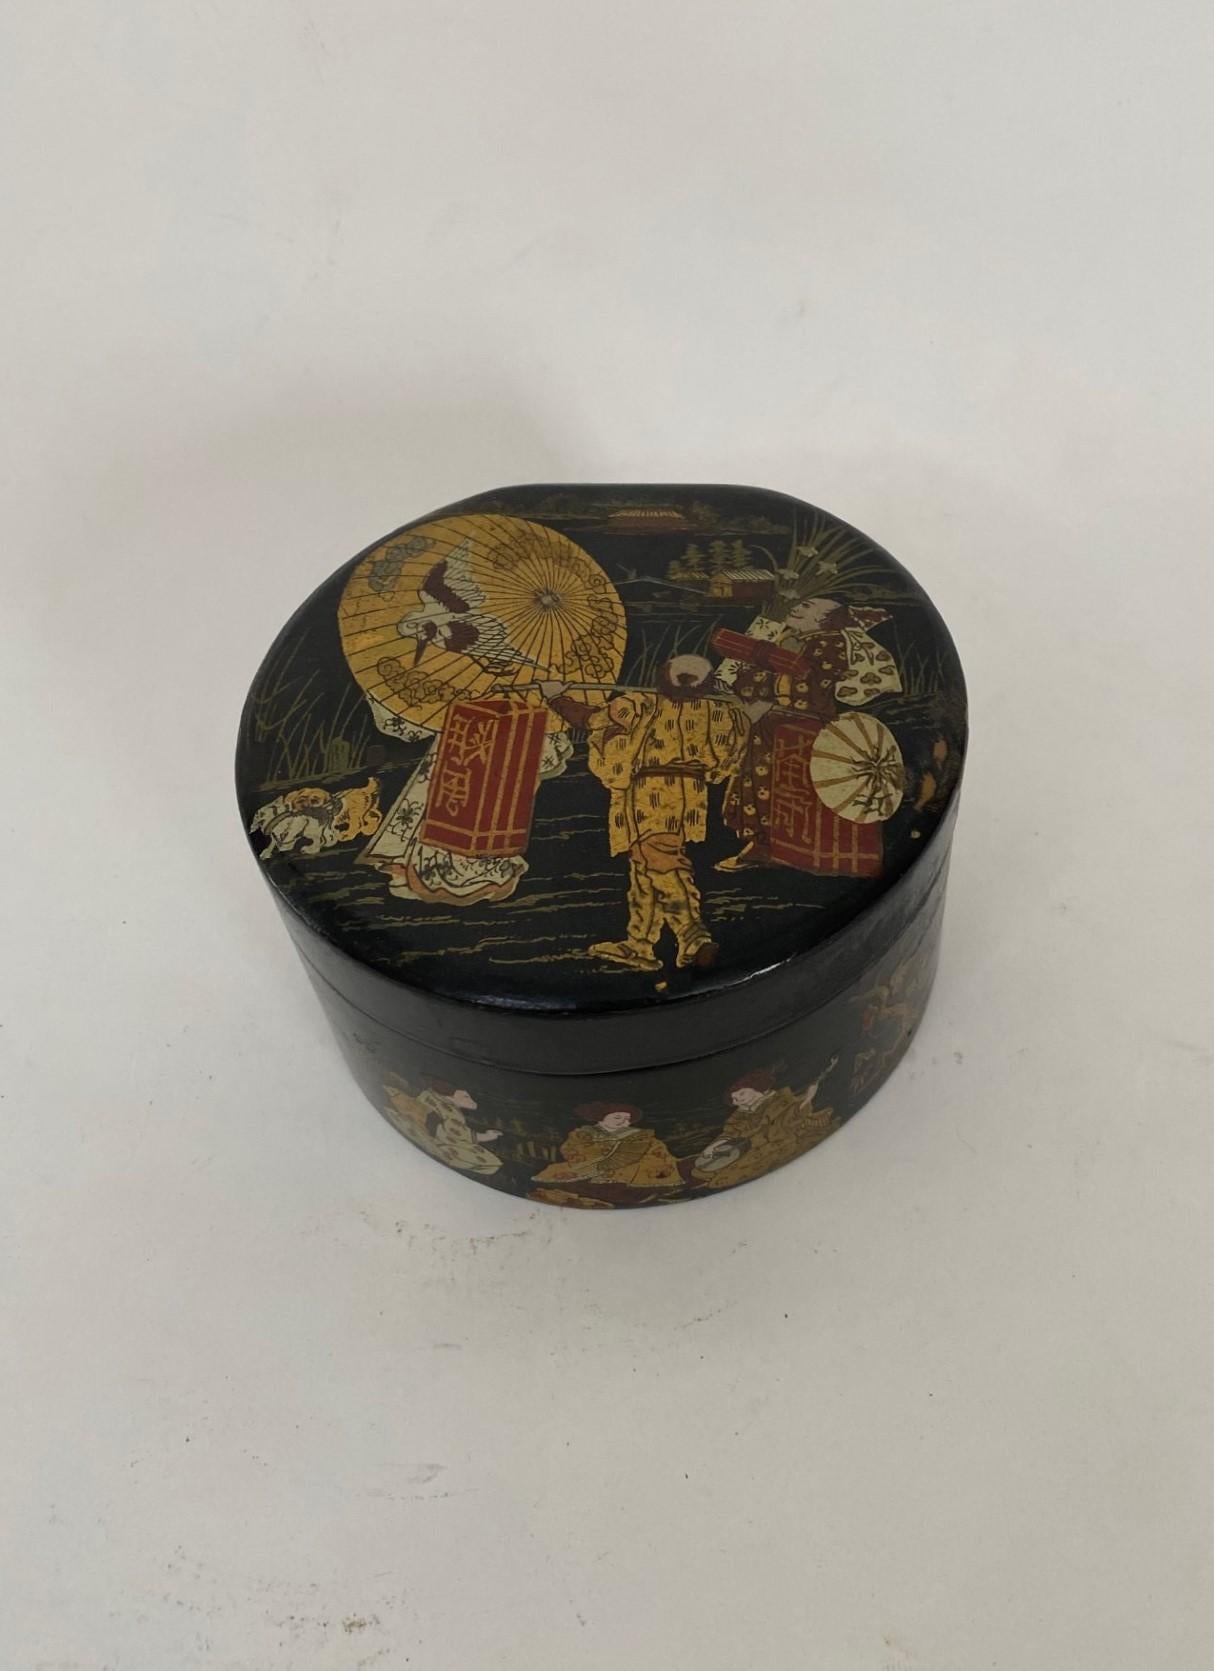 Attractive old Japanese black lacquered round papier-mache box with hand painted decoration and hinged top.